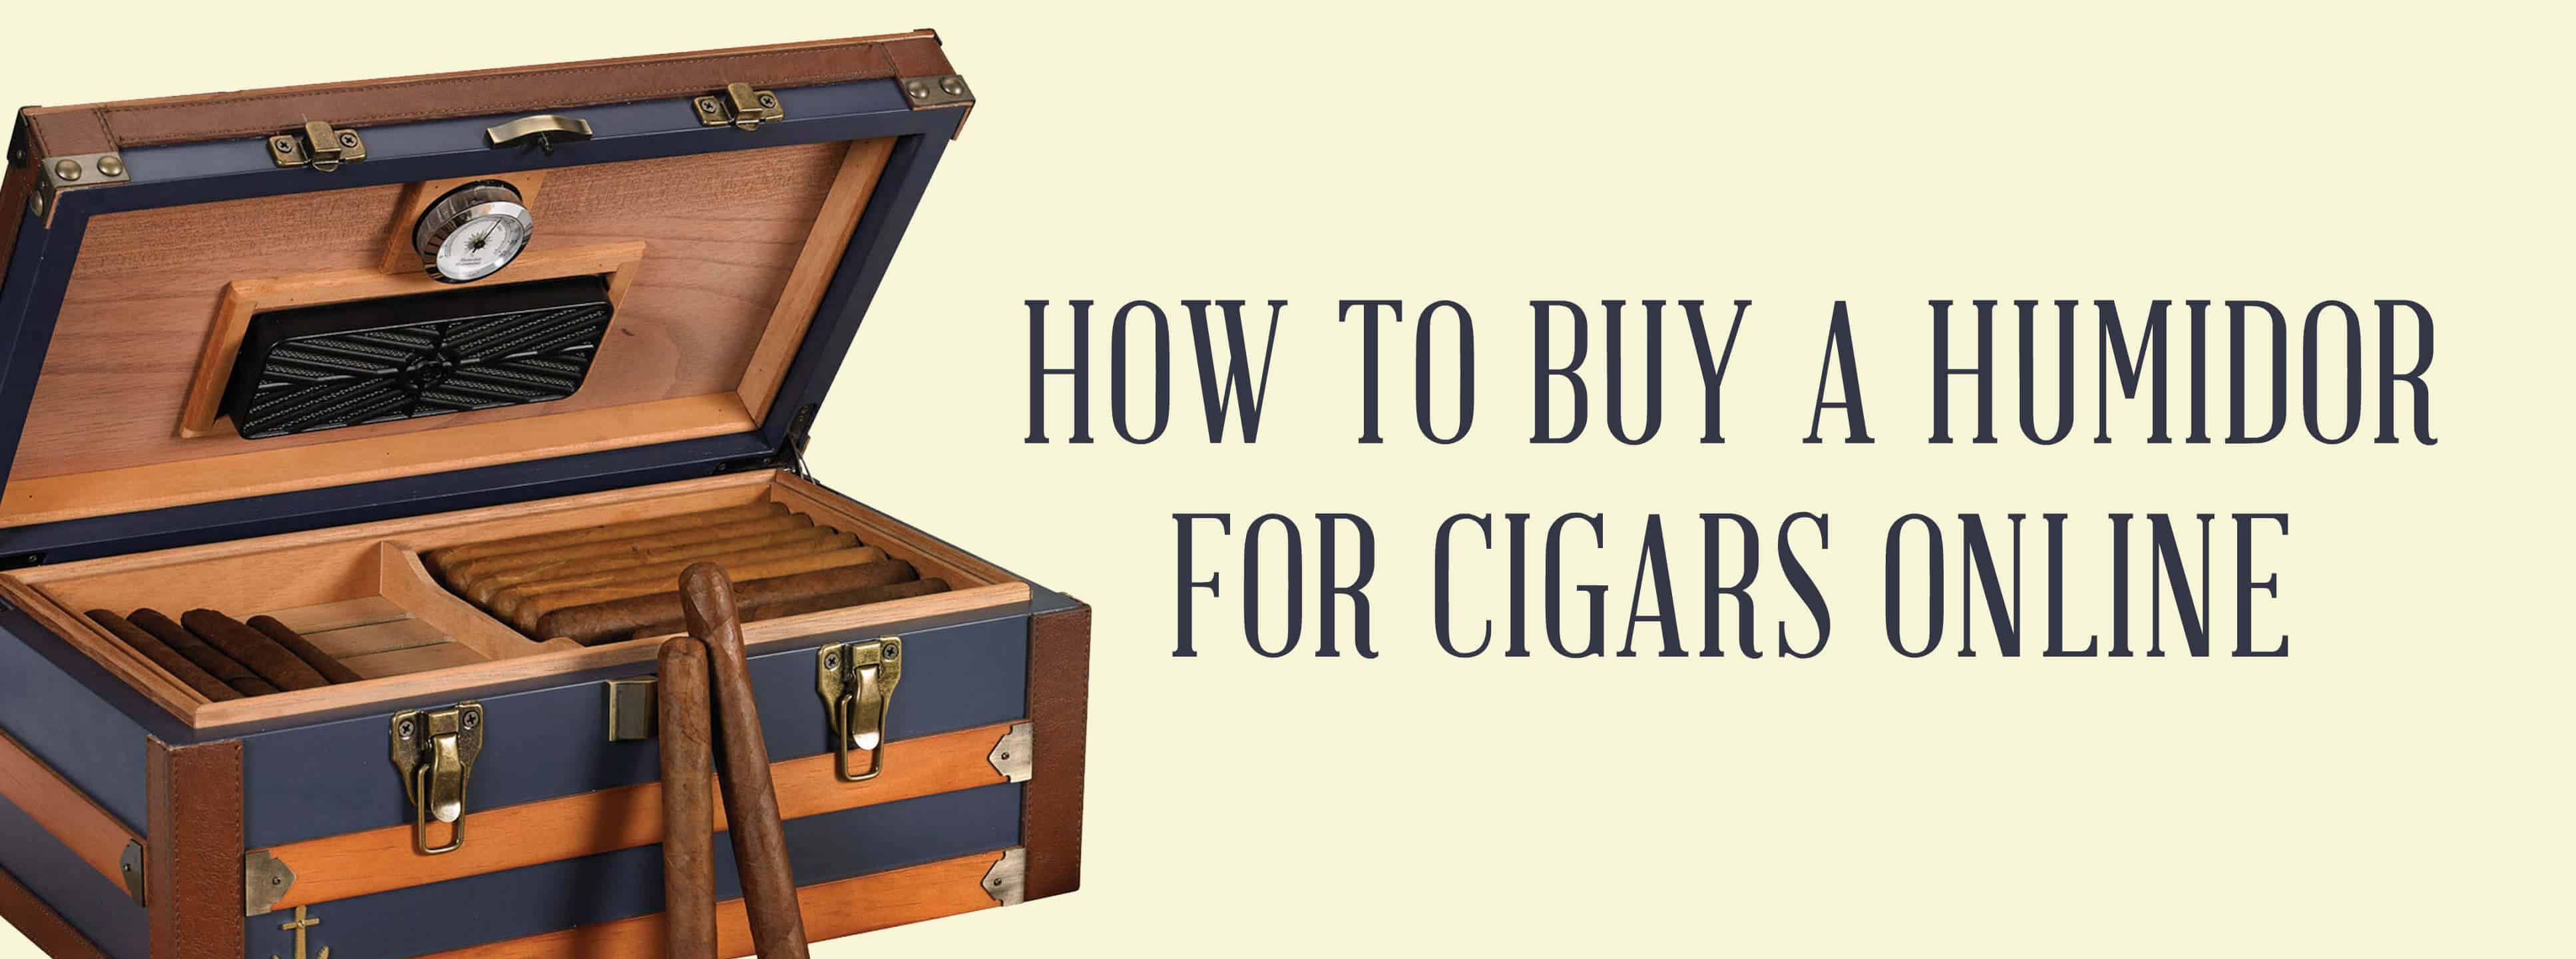 Buy A Humidor For Cigars